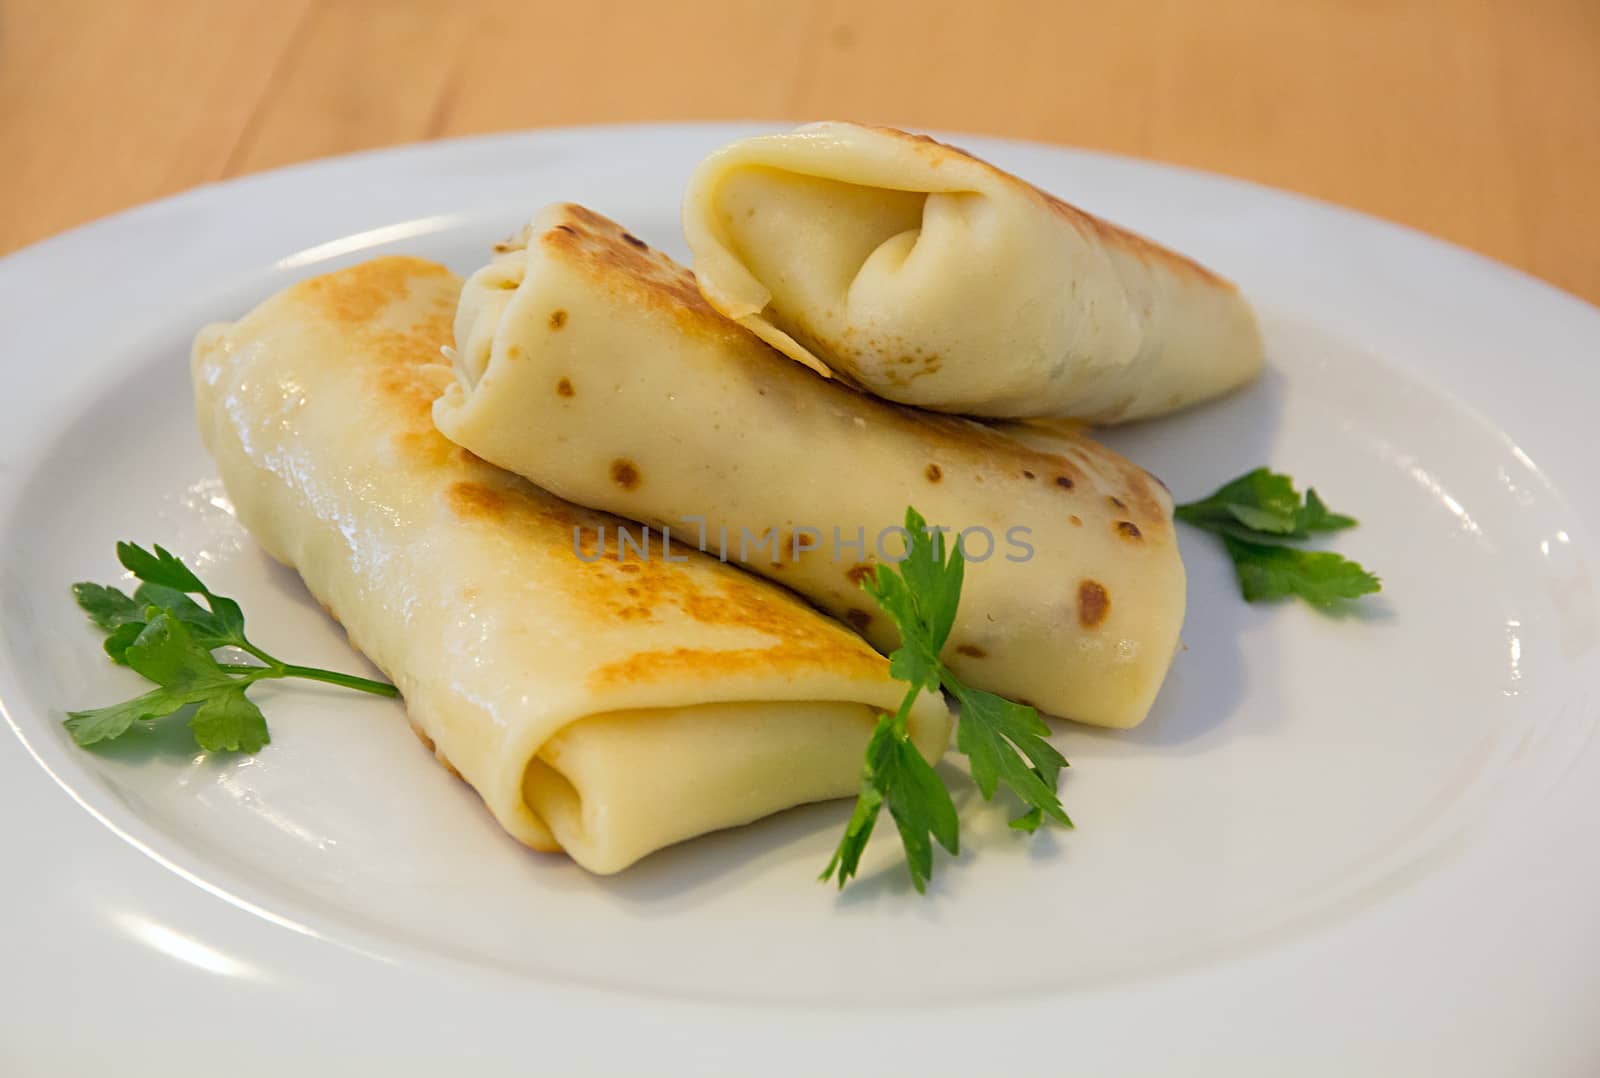 Spring rolles on the white plate by dedmorozz